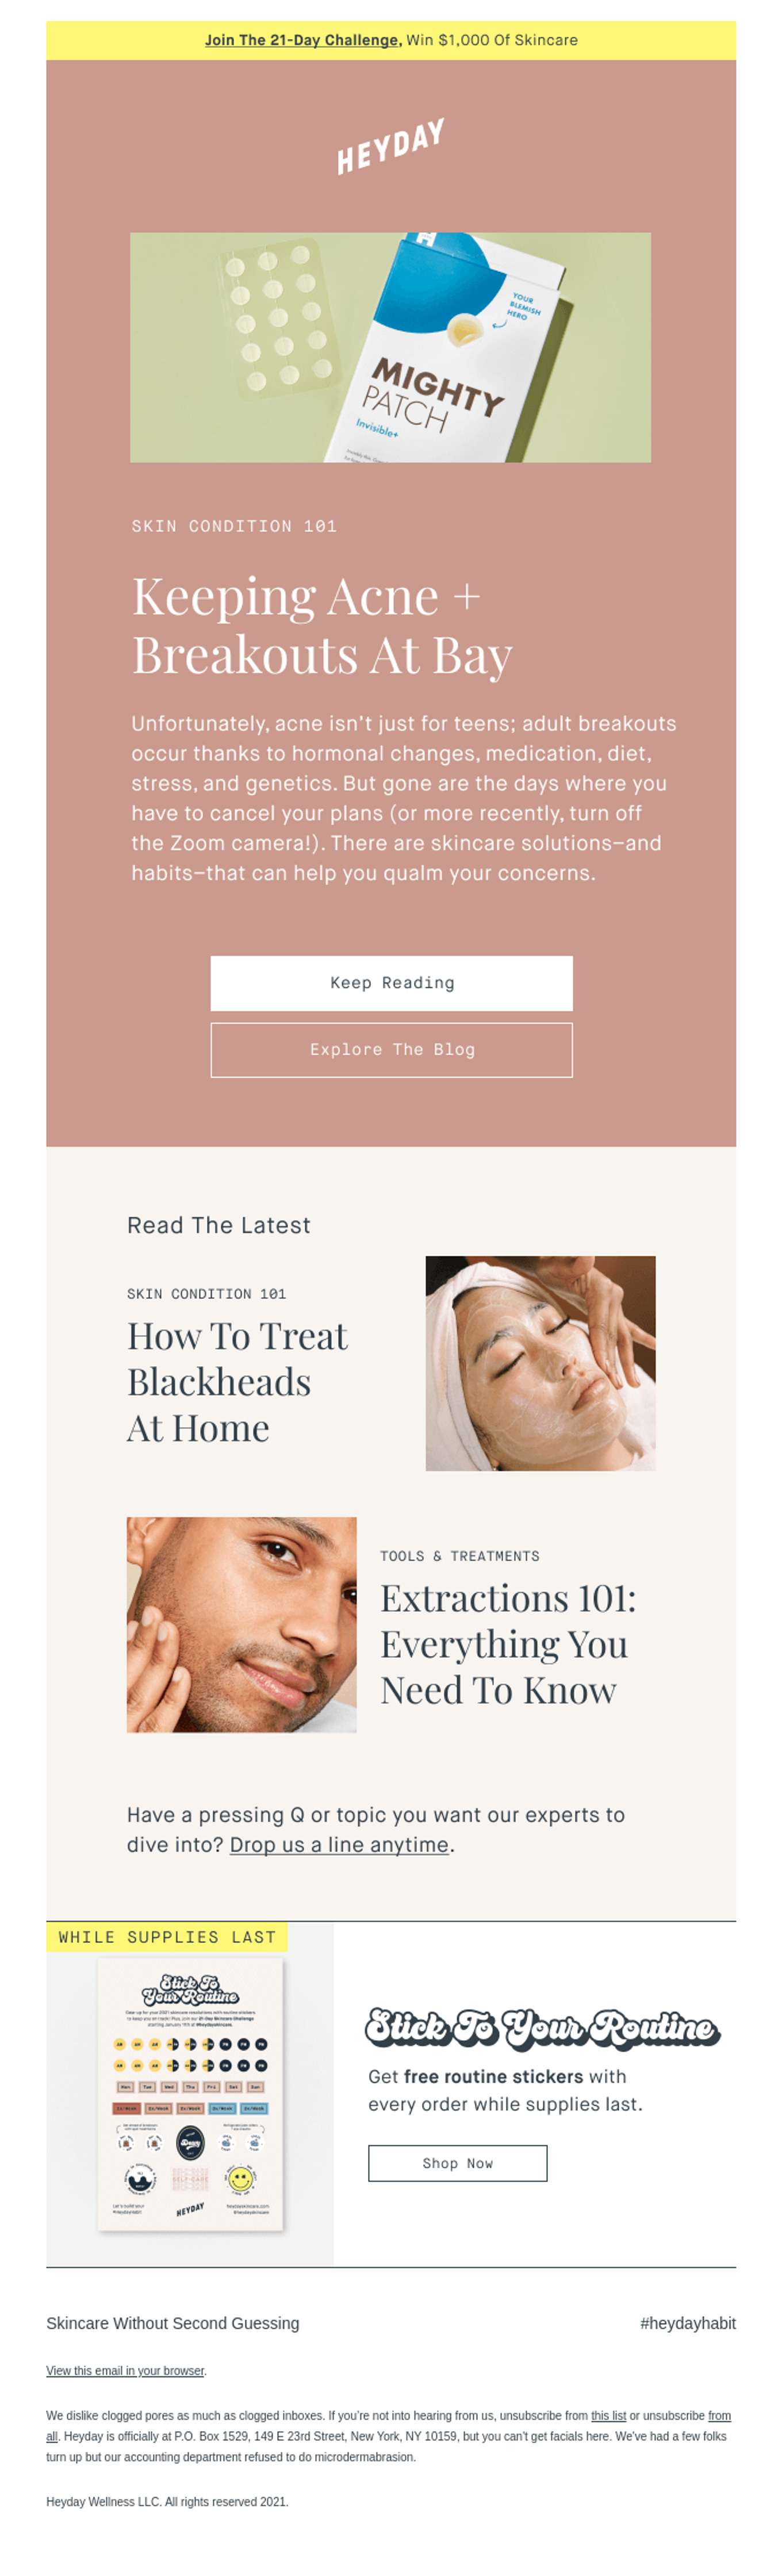 Onderwerp: How our estheticians *actually* prevent and treat acne